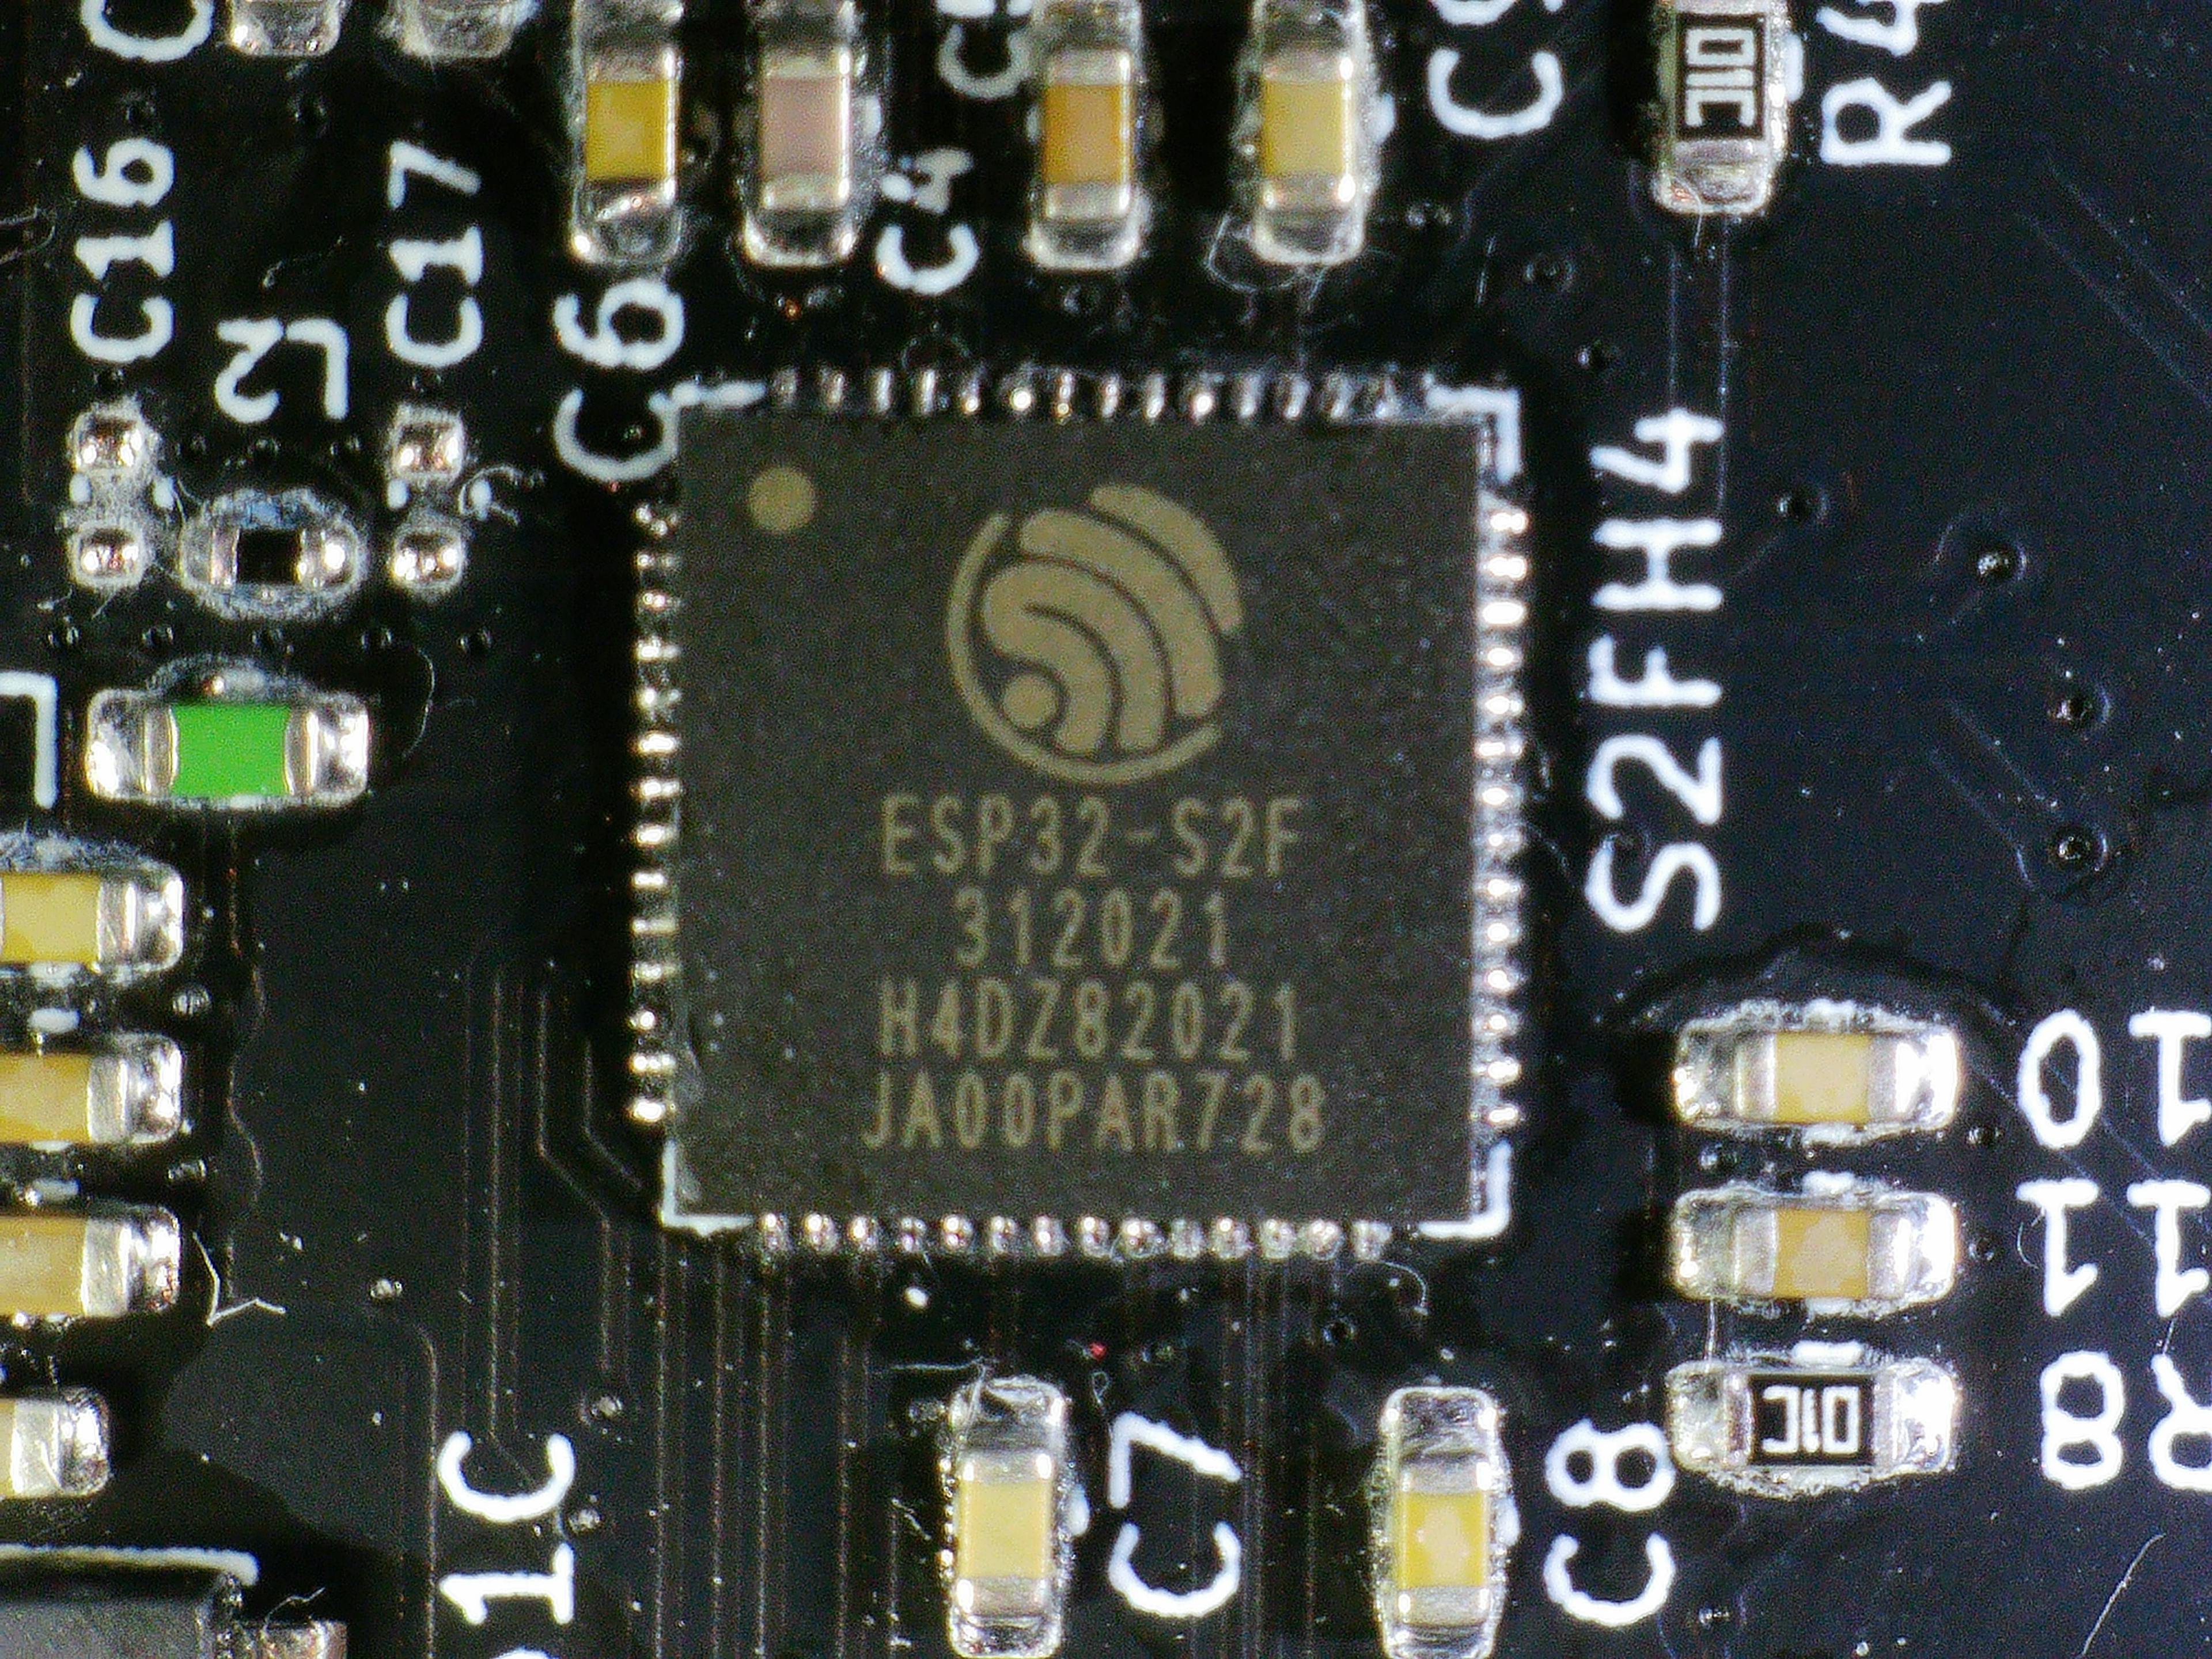 Cover Image for How to setup custom ESP32-S2 boards in PlatformIO